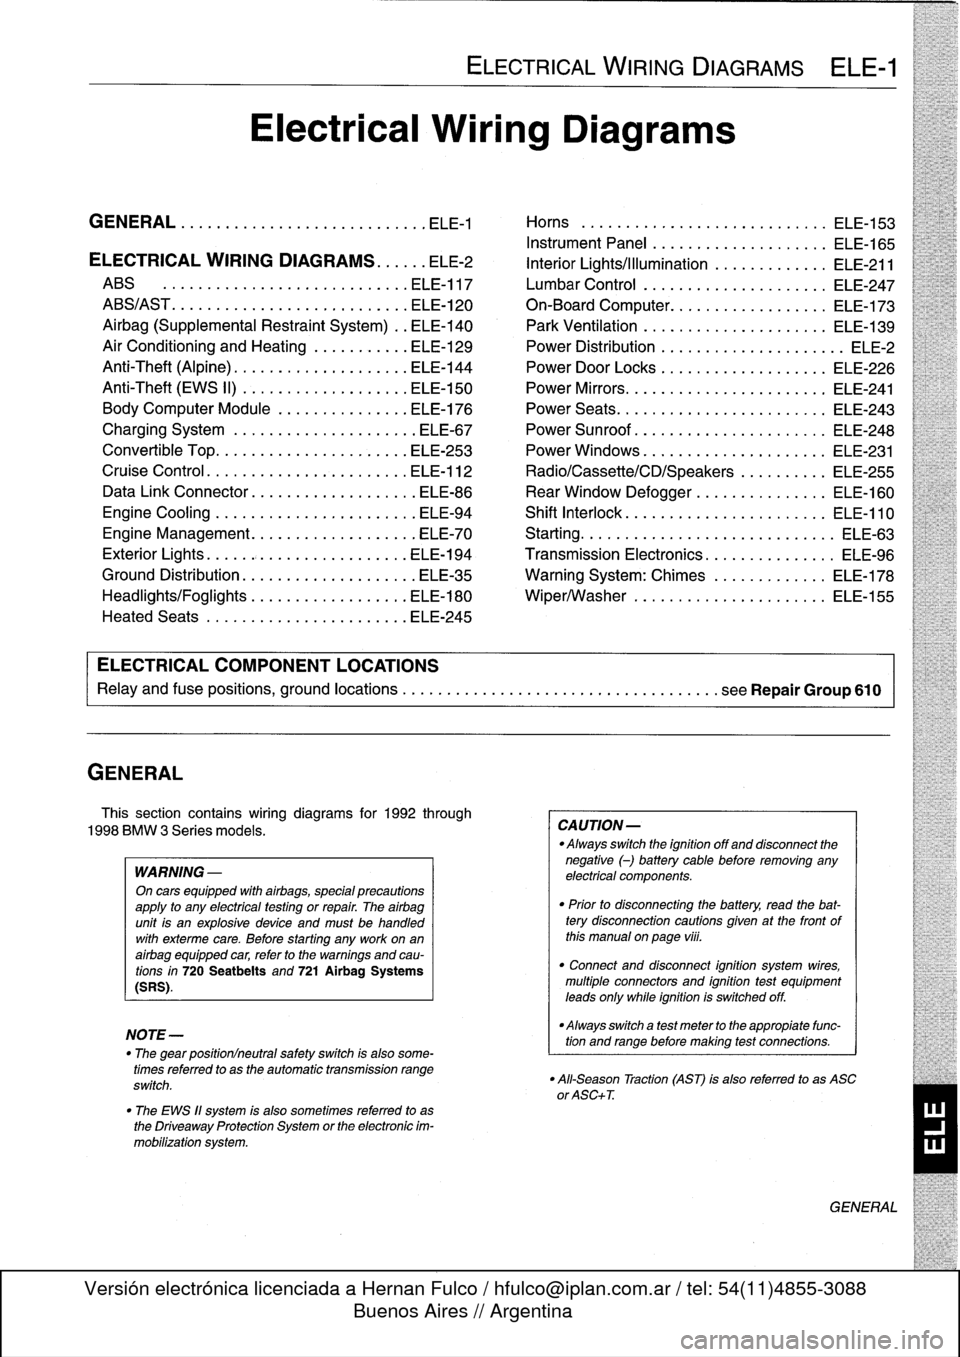 BMW M3 1996 E36 Service Manual 
GENERAL

This
section
contains
wiring
diagrams
for
1992
through

1998
BMW
3
Series
models
.

WARNING
-

On
cars
equipped
with
airbags,
special
precautions
apply
to
any
electrical
testing
or
repair
.
